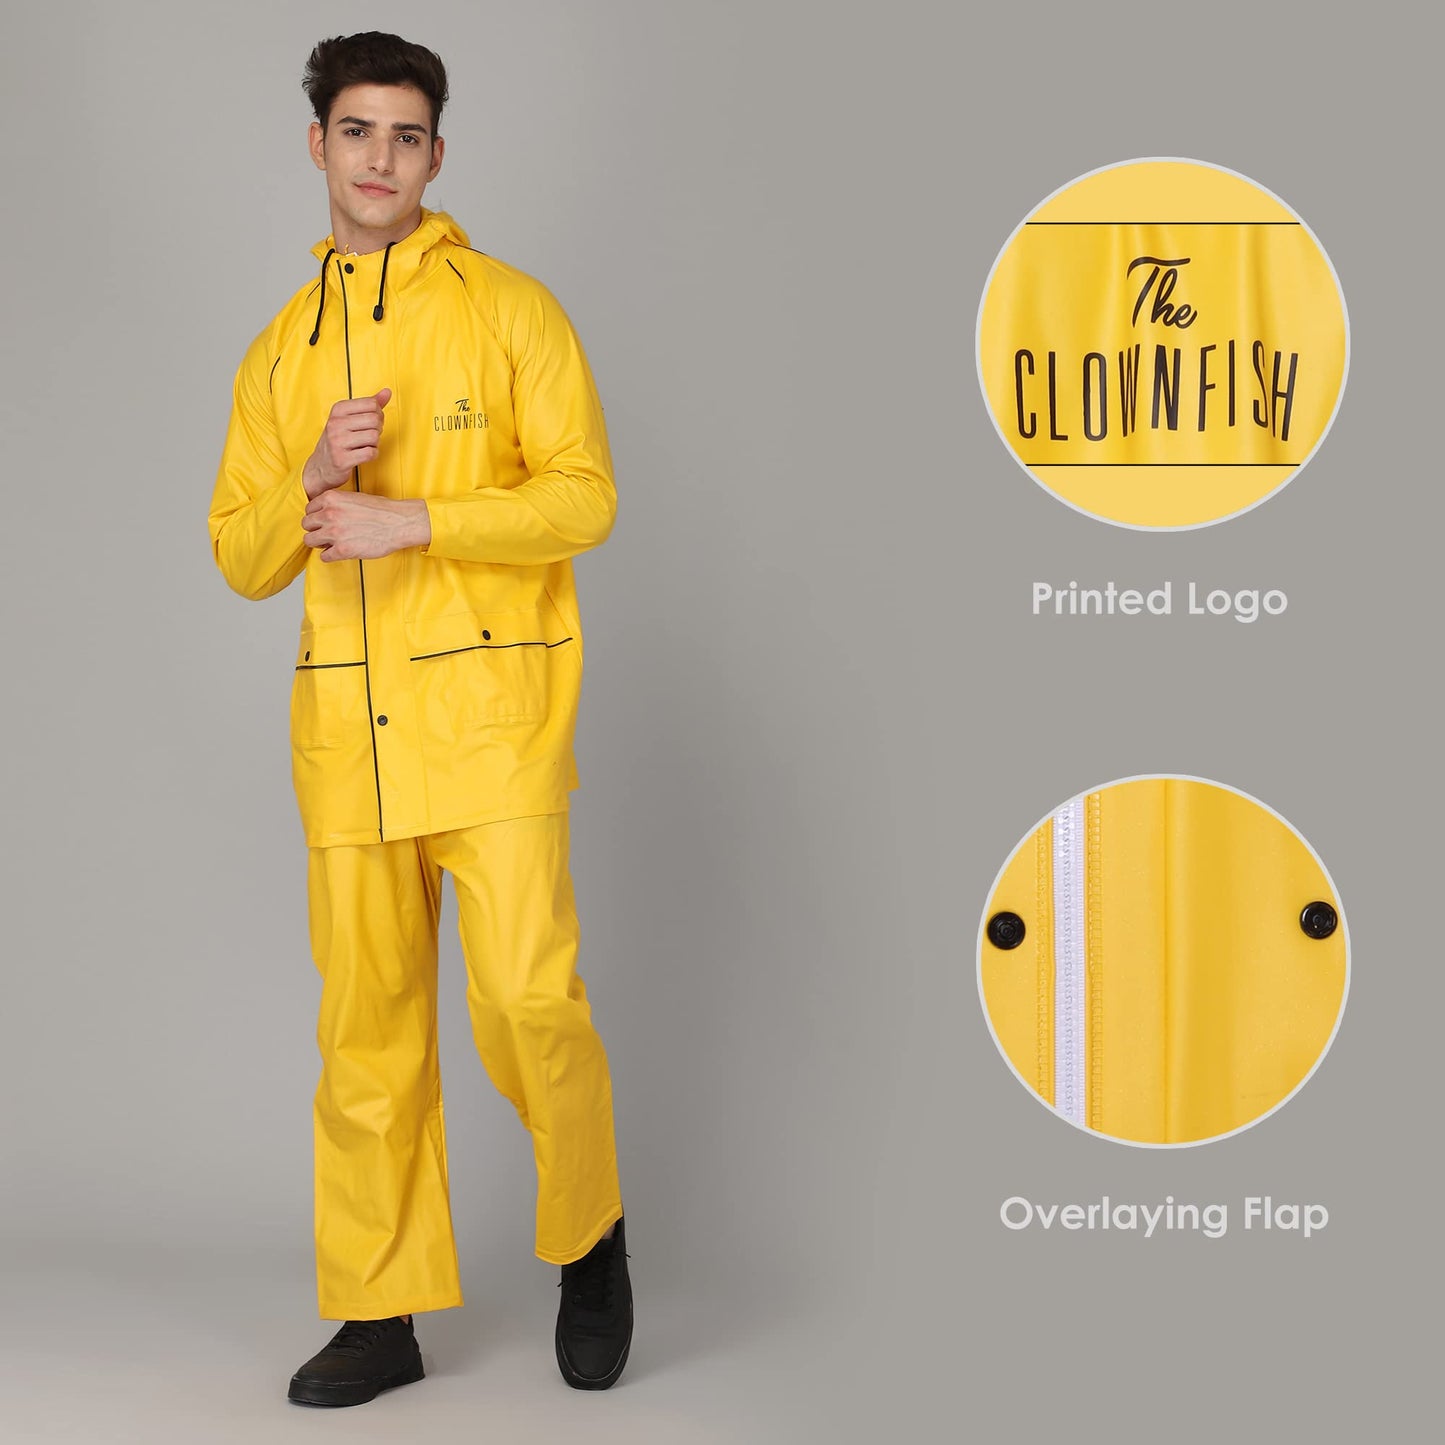 THE CLOWNFISH Azure Series Men's PVC Solid Waterproof Rain coat with Hood Set of Top and Bottom (Sea Green, X-Large)